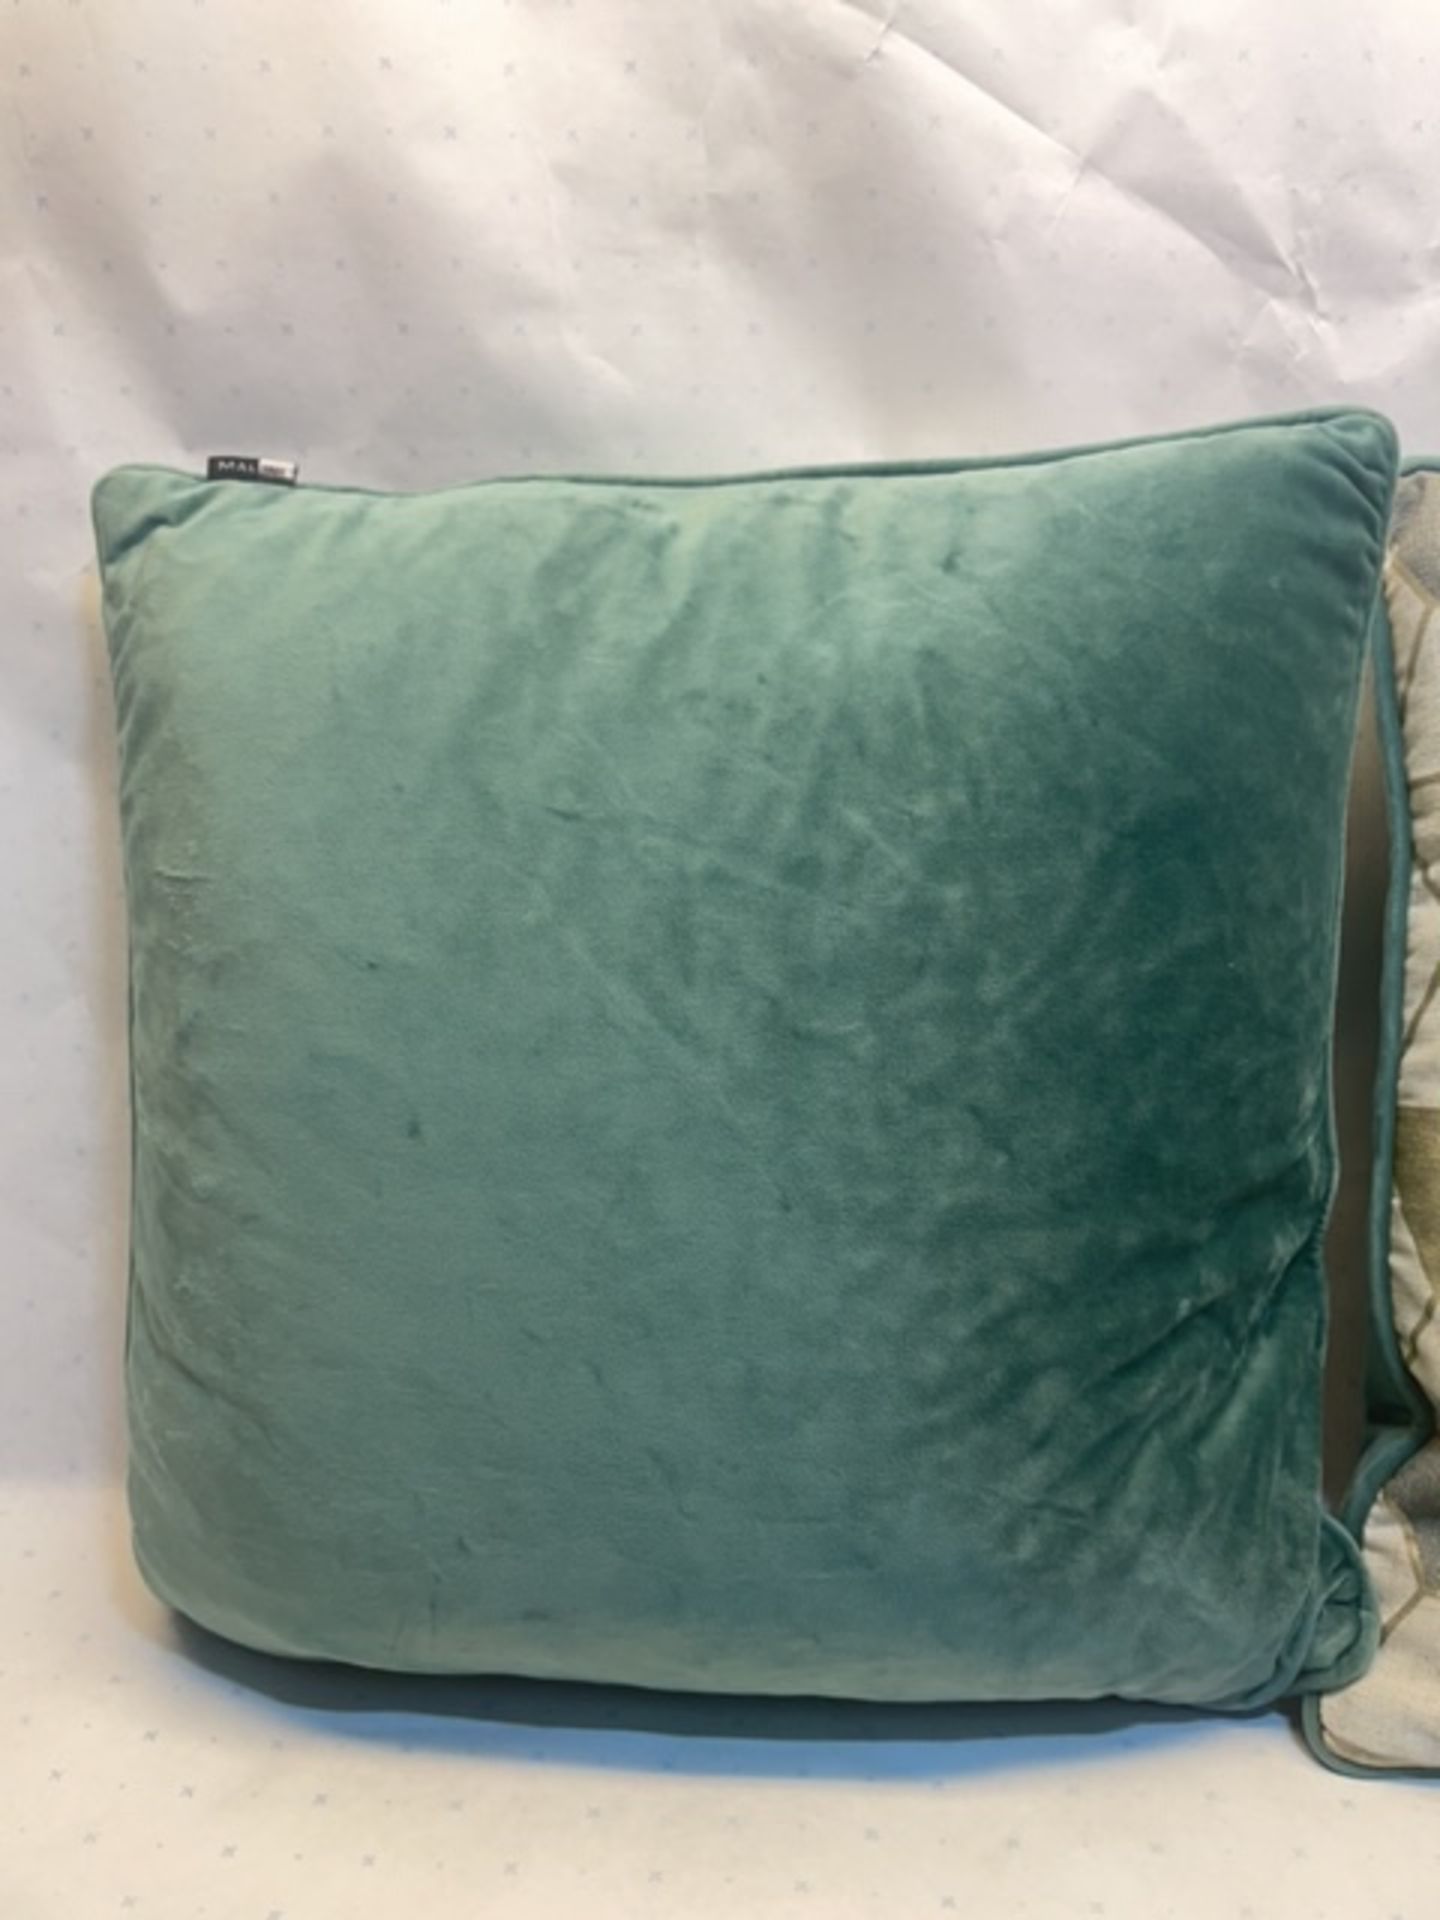 2 X Green Cushions with Geometric Pattern on Front - Image 3 of 3